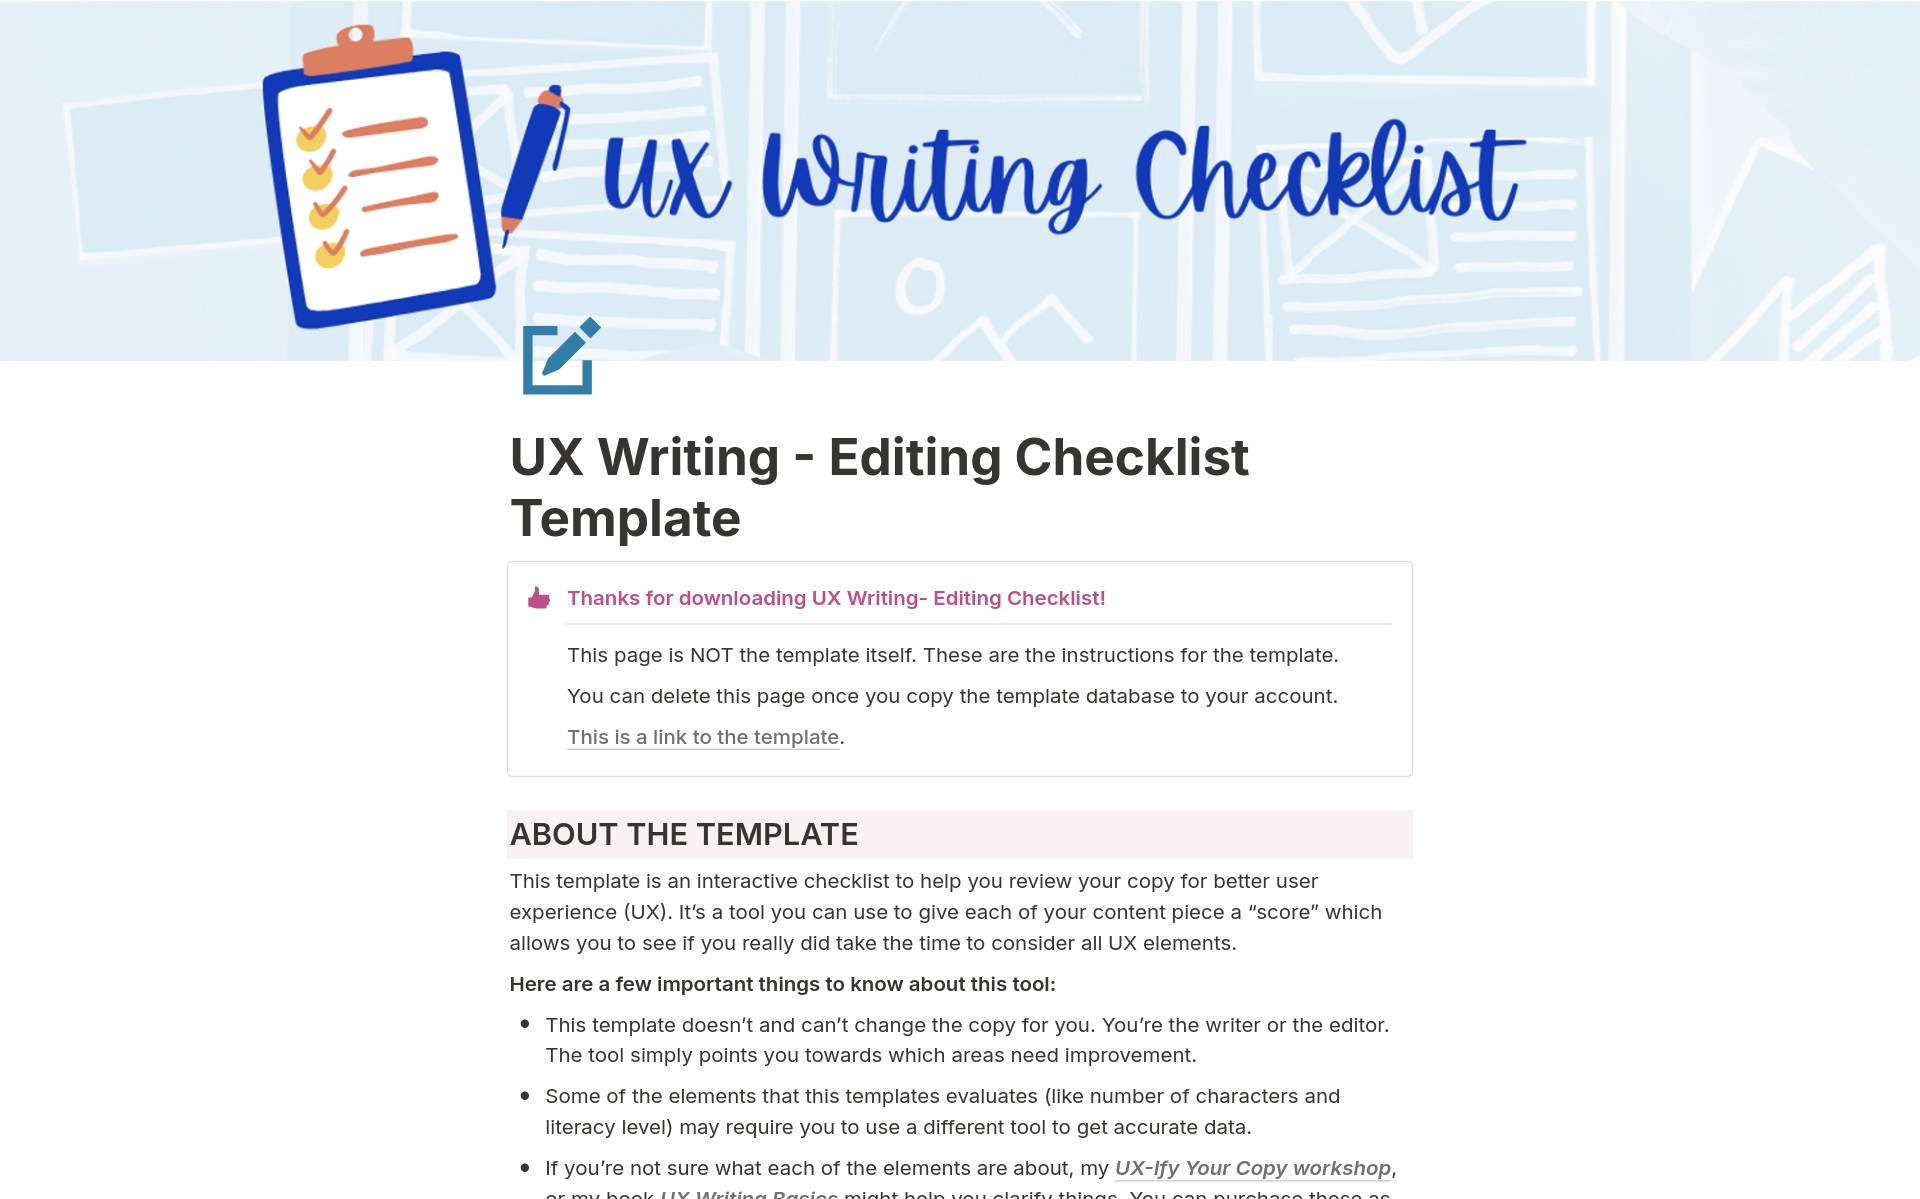 A template preview for UX Writing - Editing Checklist